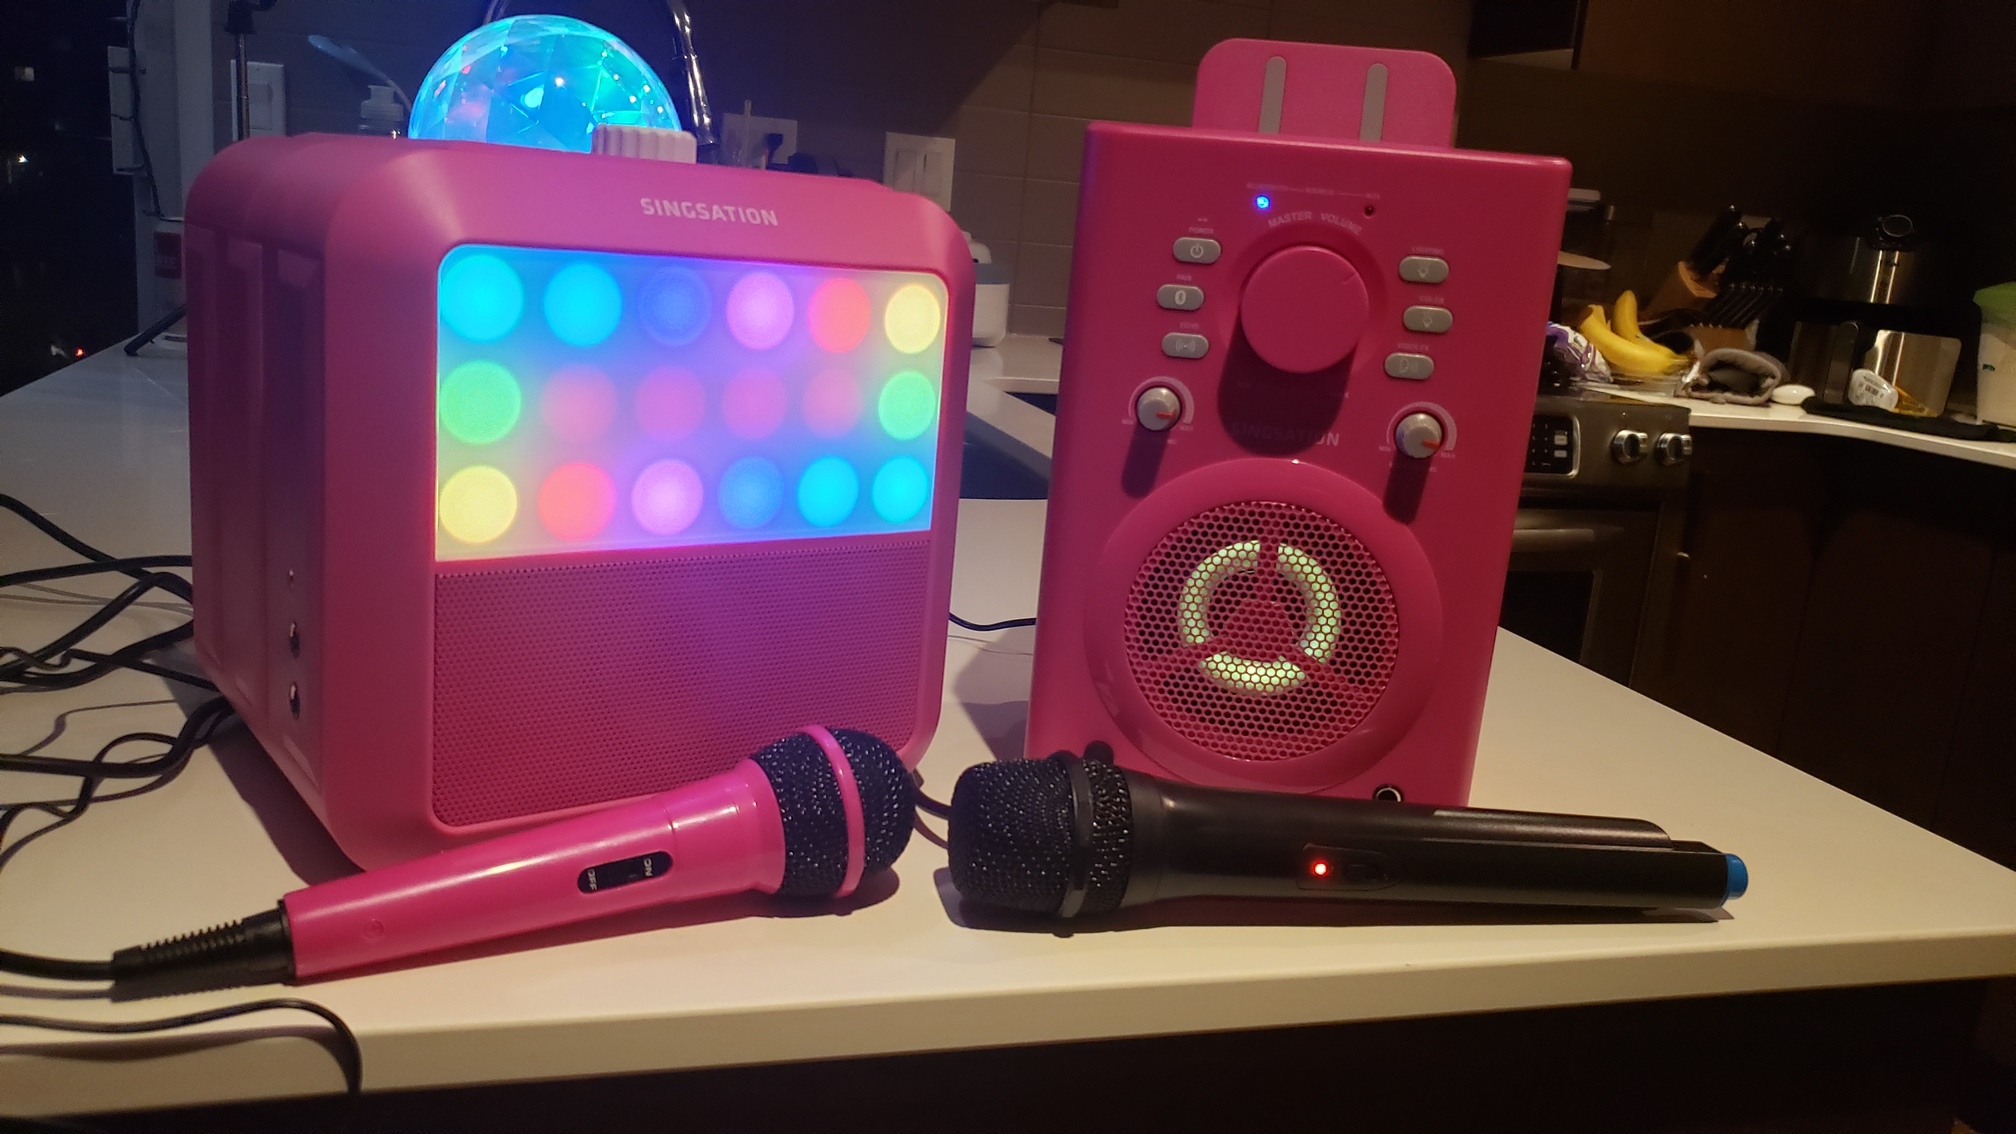 the 3 Singsation Karaoke products together with all the lights on